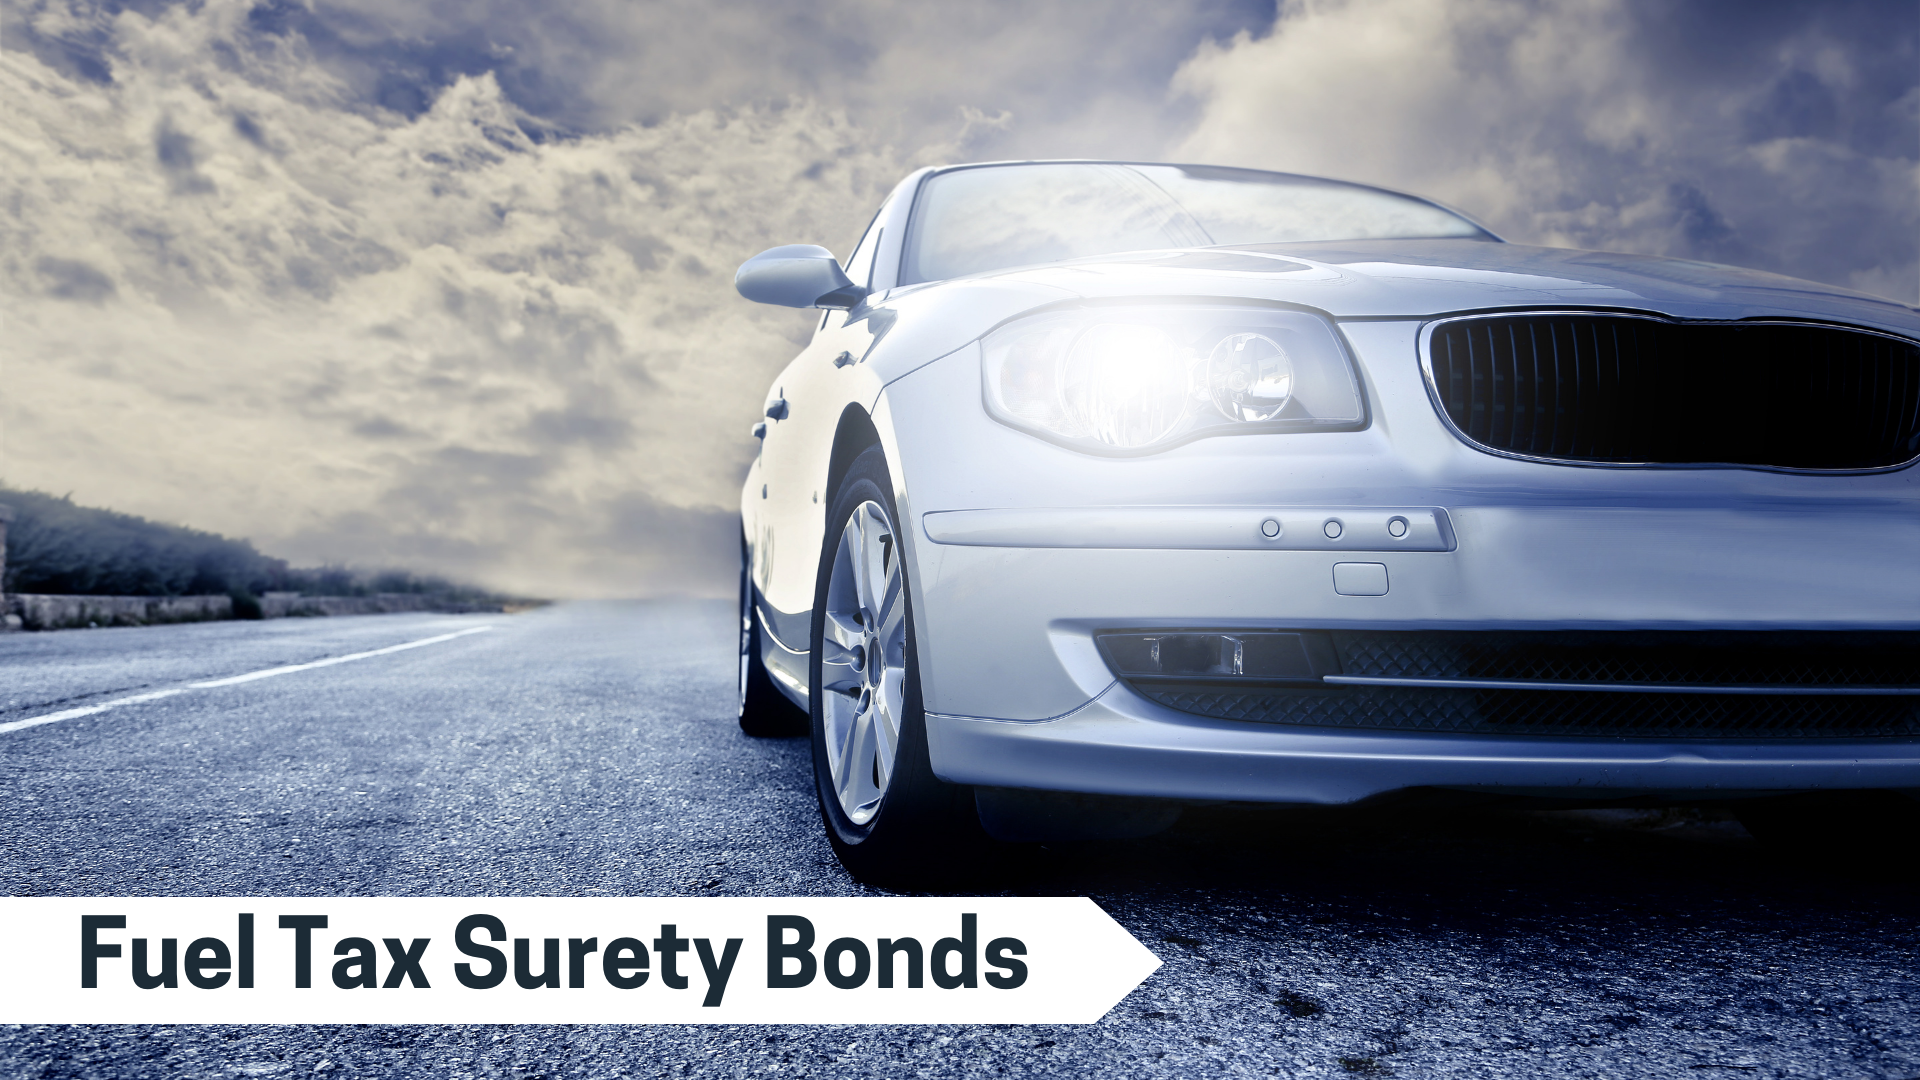 surety bond - What is a fuel tax surety bond - car on the road